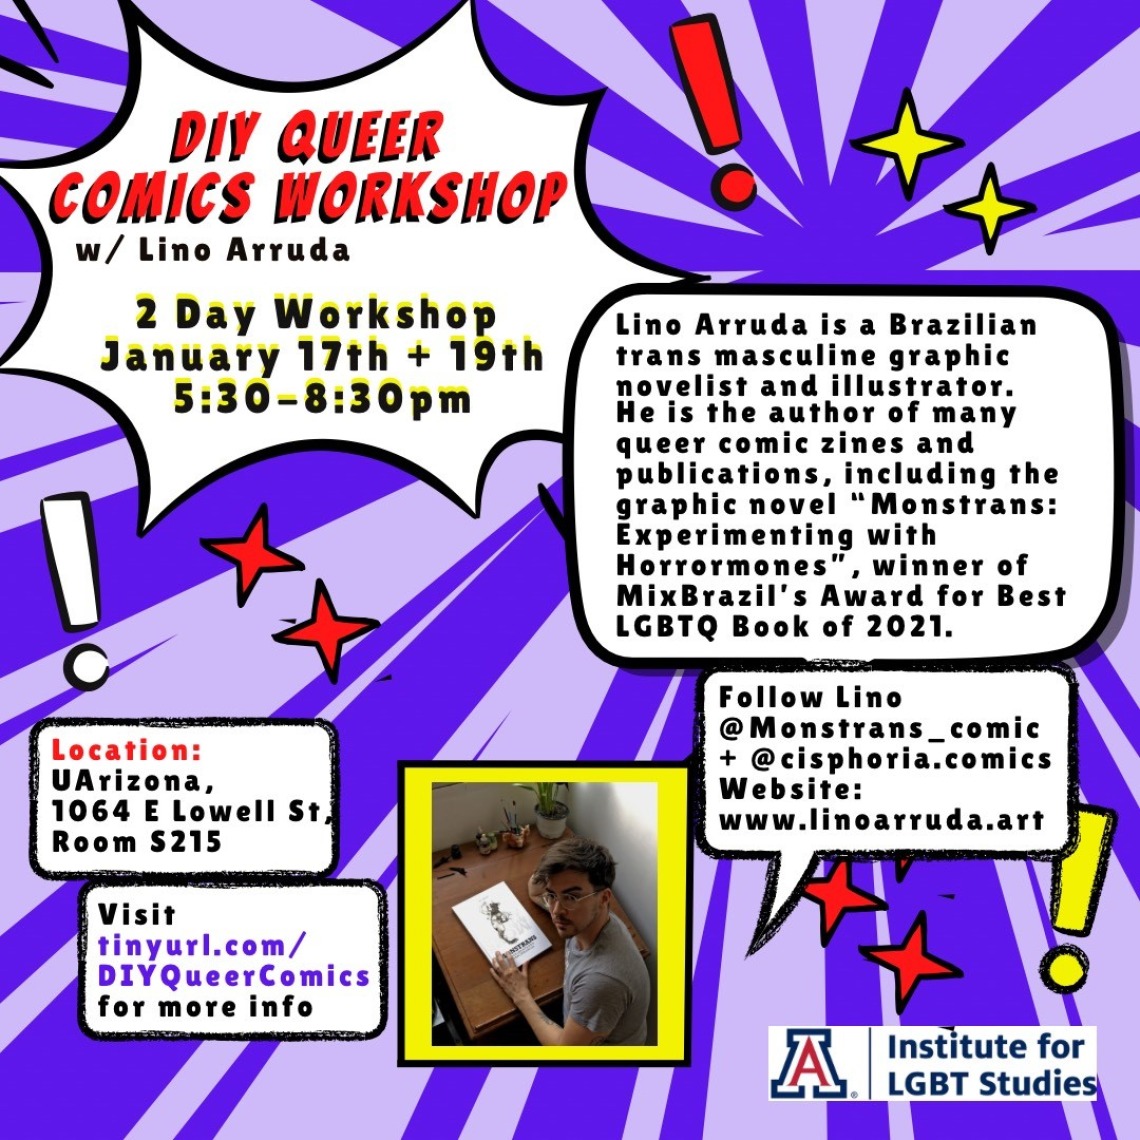 background is two shades of purple in a burst shape with red, yellow, and white stars and exclamation points. White text bubbles with red, purple, and black text reads: “DIY Queer Comics Workshop w/ Lino Arruda. 2 day workshop, January 17th & 19th. 5:30-8:30pm. Website: www.linoarruda.art Location: UArizona, 1064 E Lowell St, Room S215. Visit tinyurl.com/DIYQueerComics for more info.